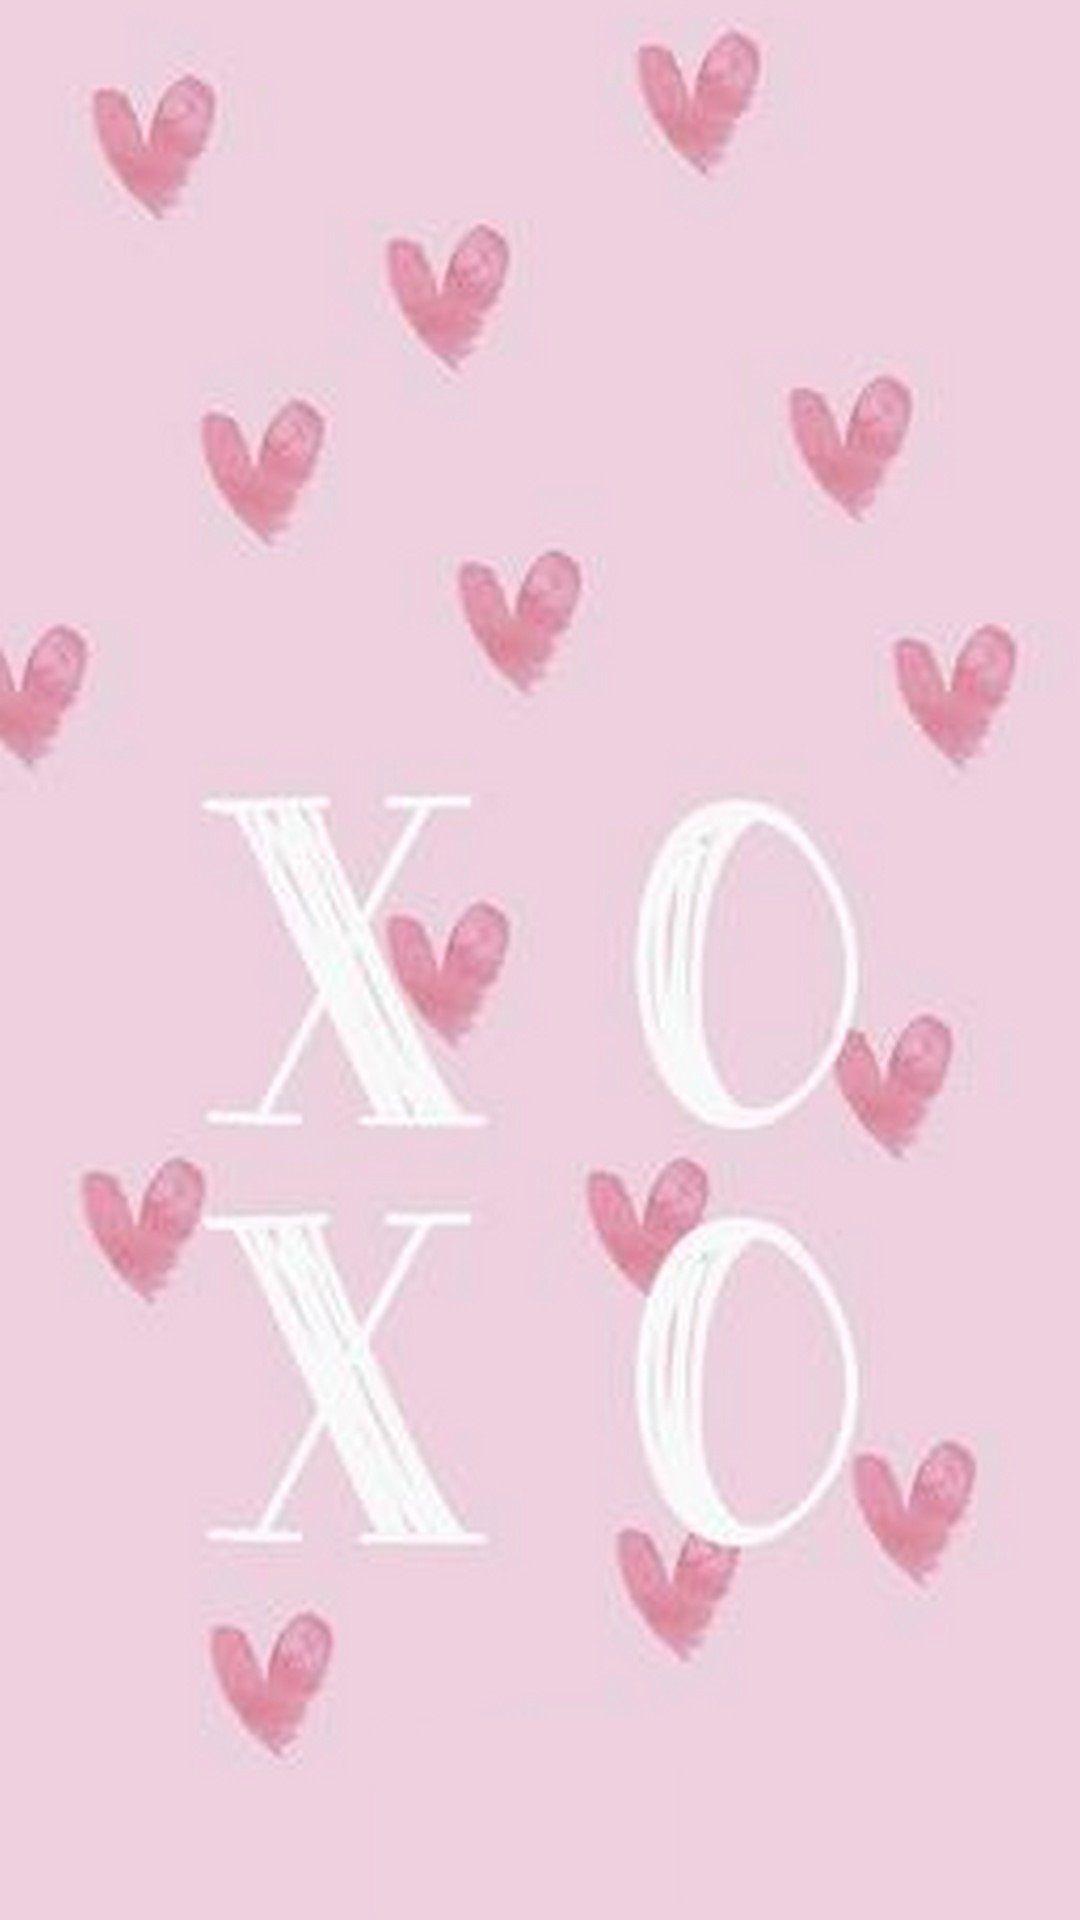 Happy Valentines Day Wallpaper for Phone  Cute Wallpaper For iPhone